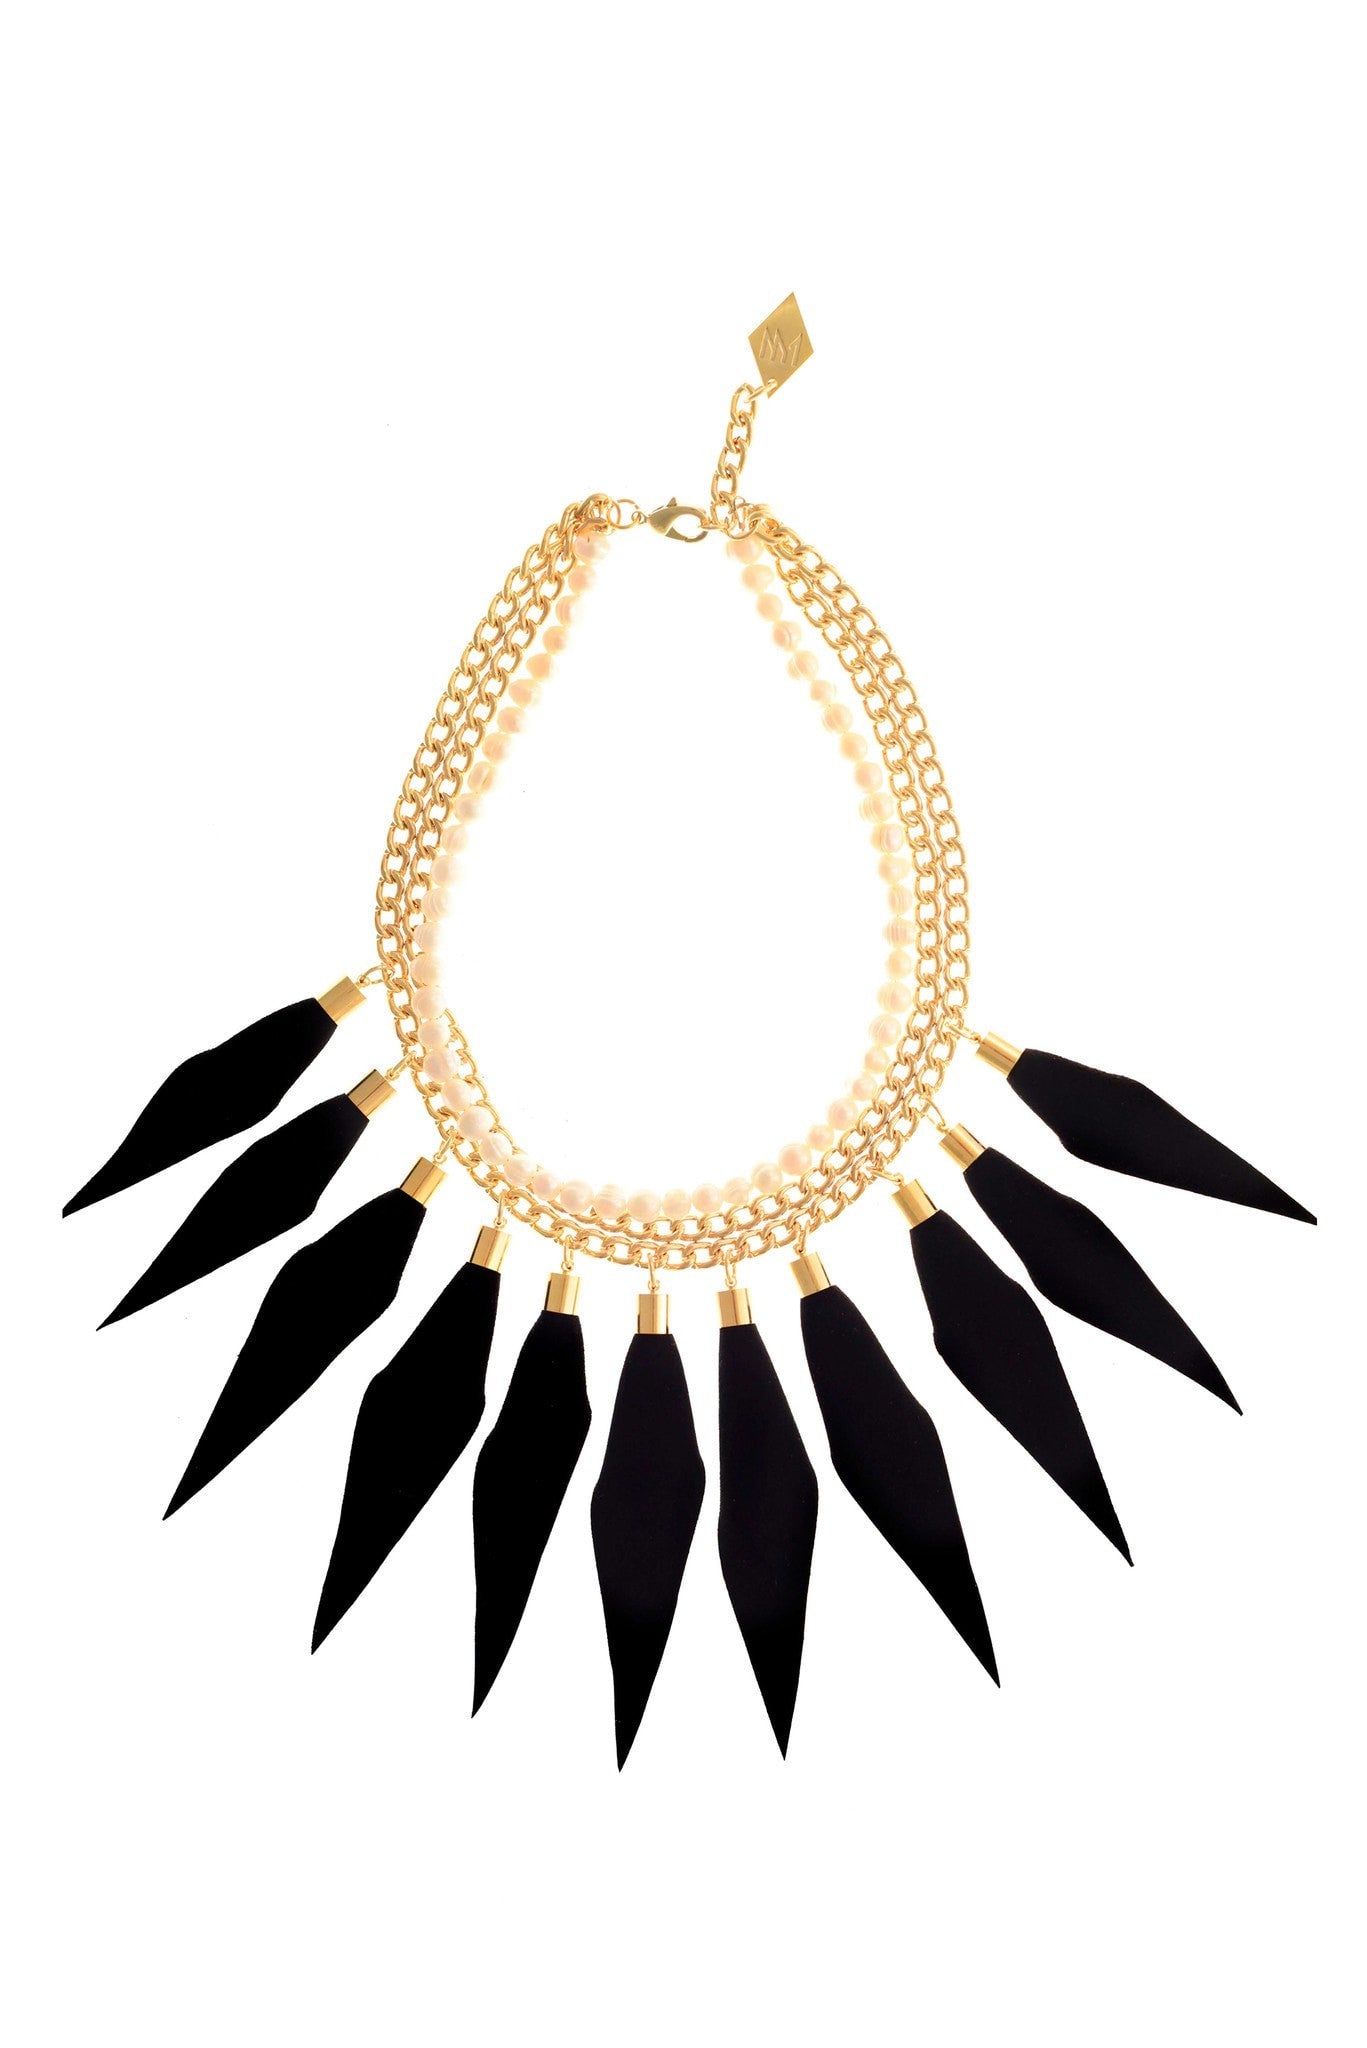 No. 1 Gold: made of black suede, freshwater pearls, galvanized brass and metal elements.